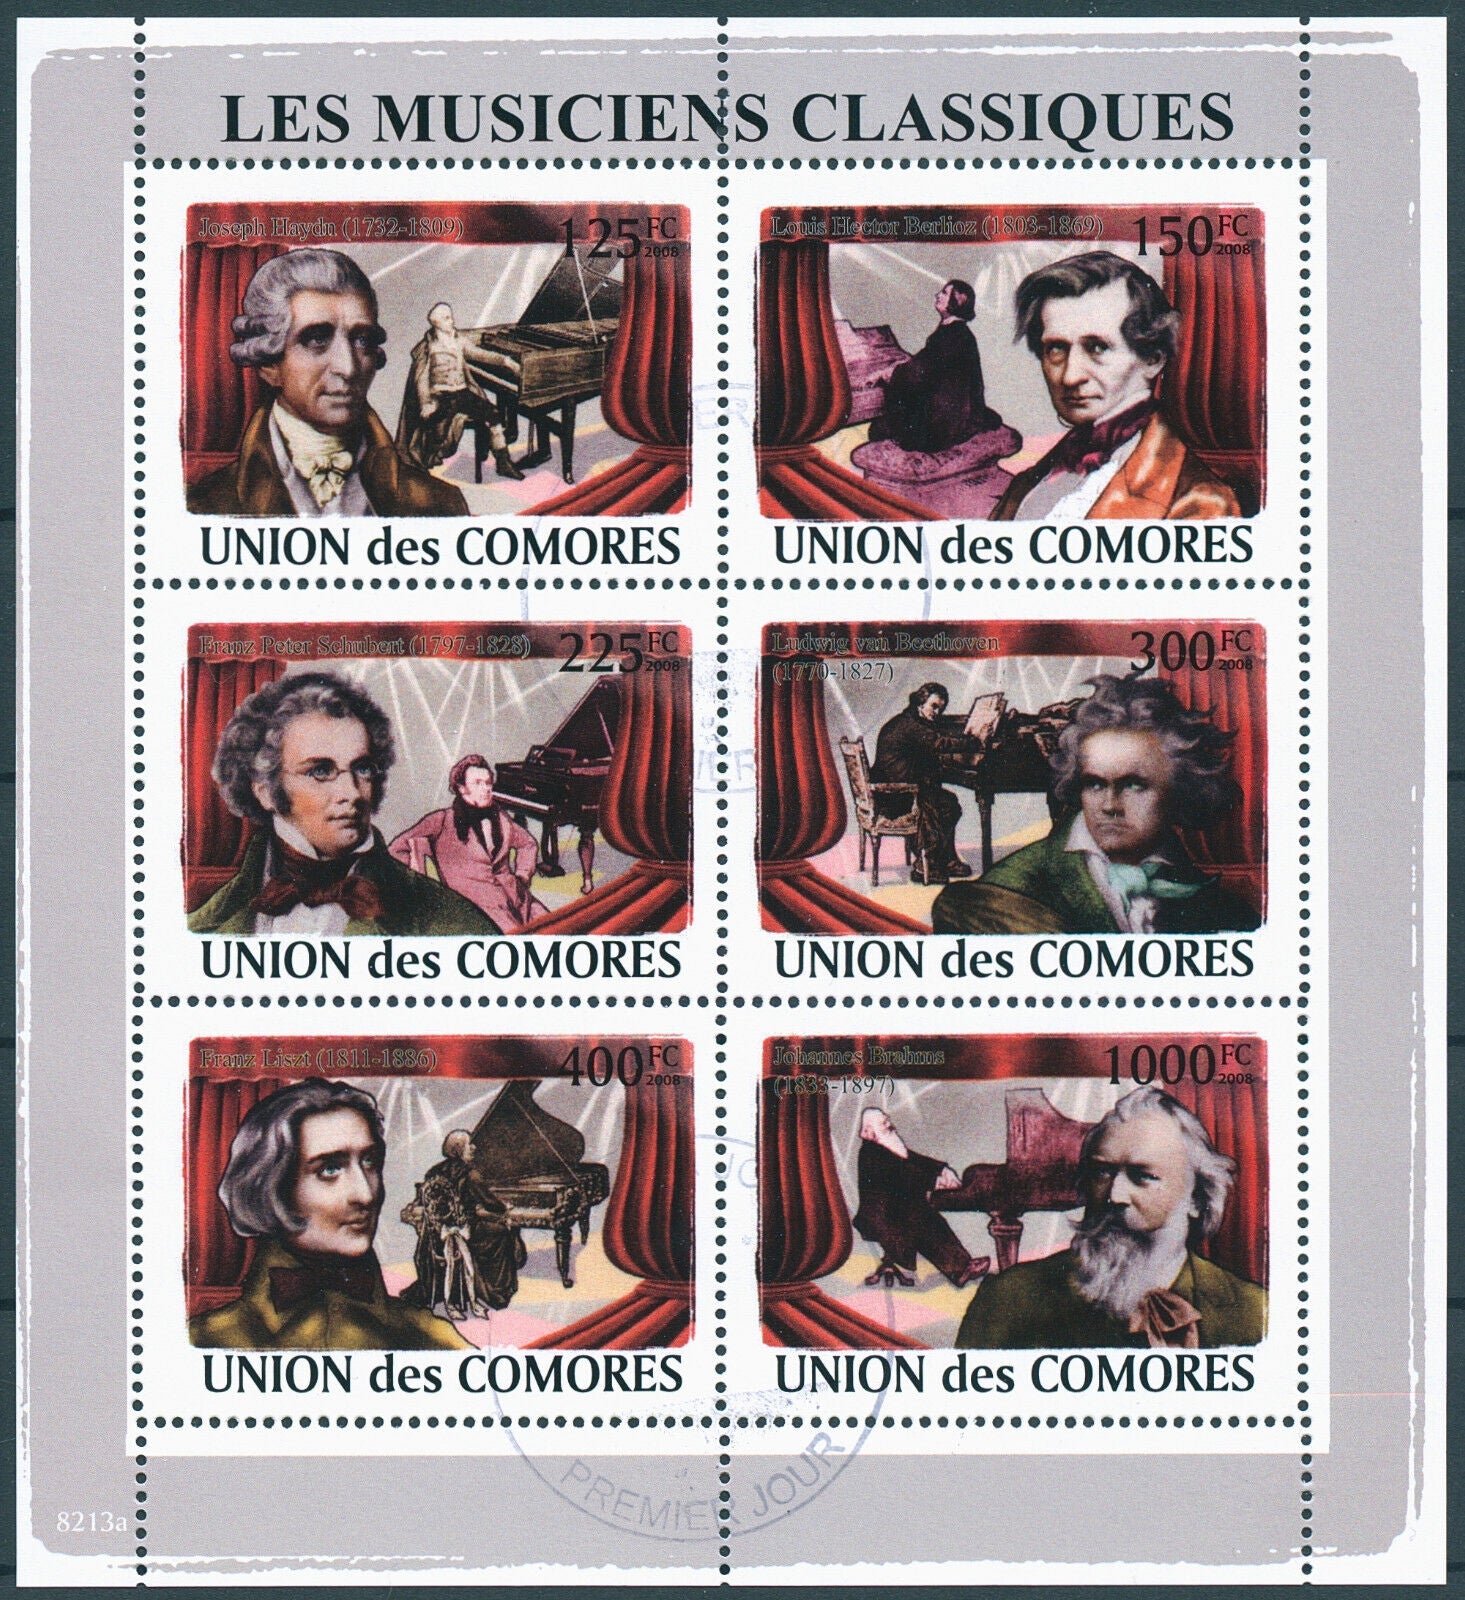 Comoros 2008 CTO Music Stamps Composers Schubert Beethoven Haydn Liszt 6v M/S